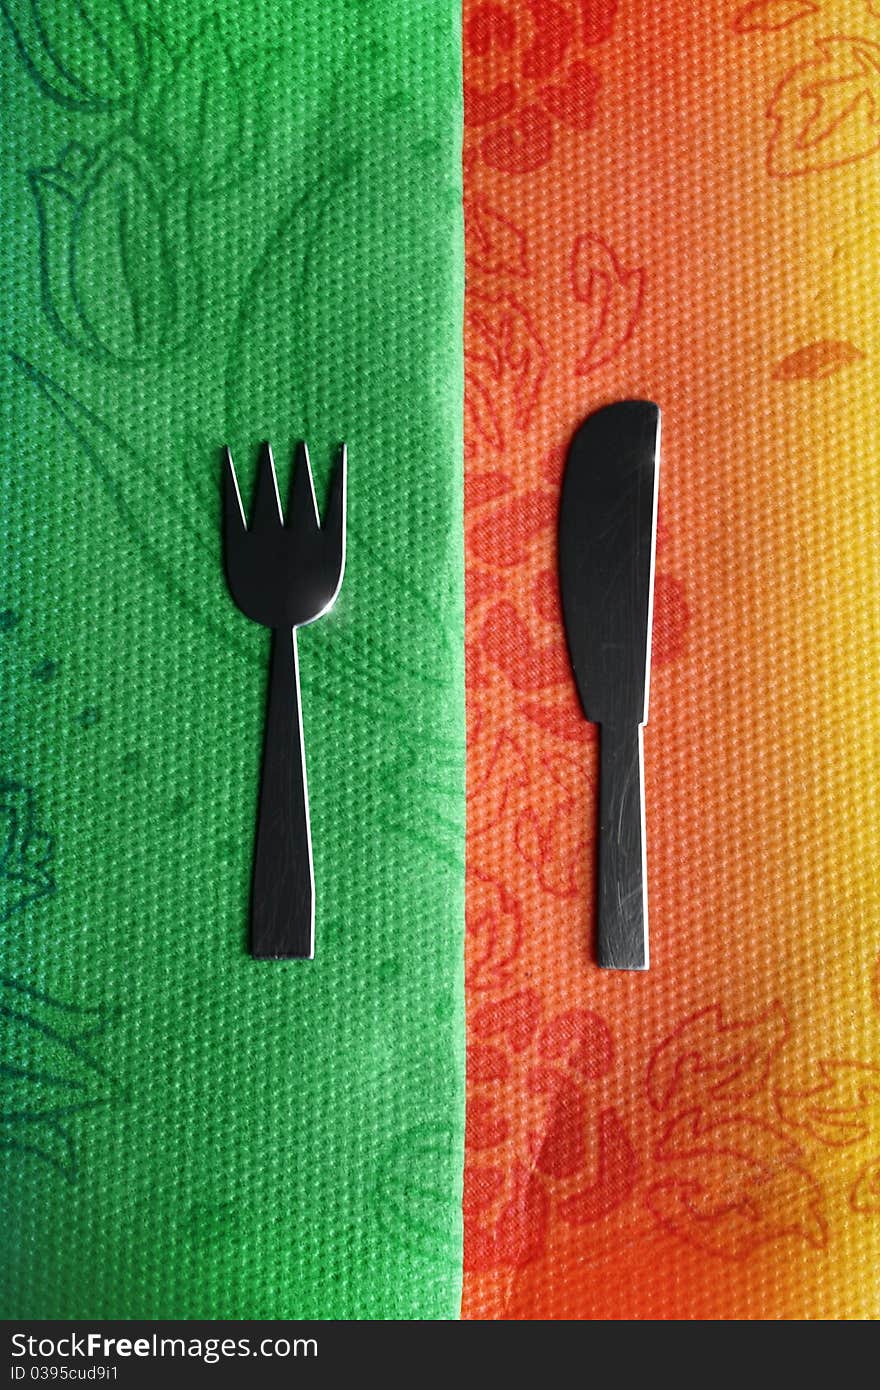 Old knife and fork on colorful tablecloth. Old knife and fork on colorful tablecloth